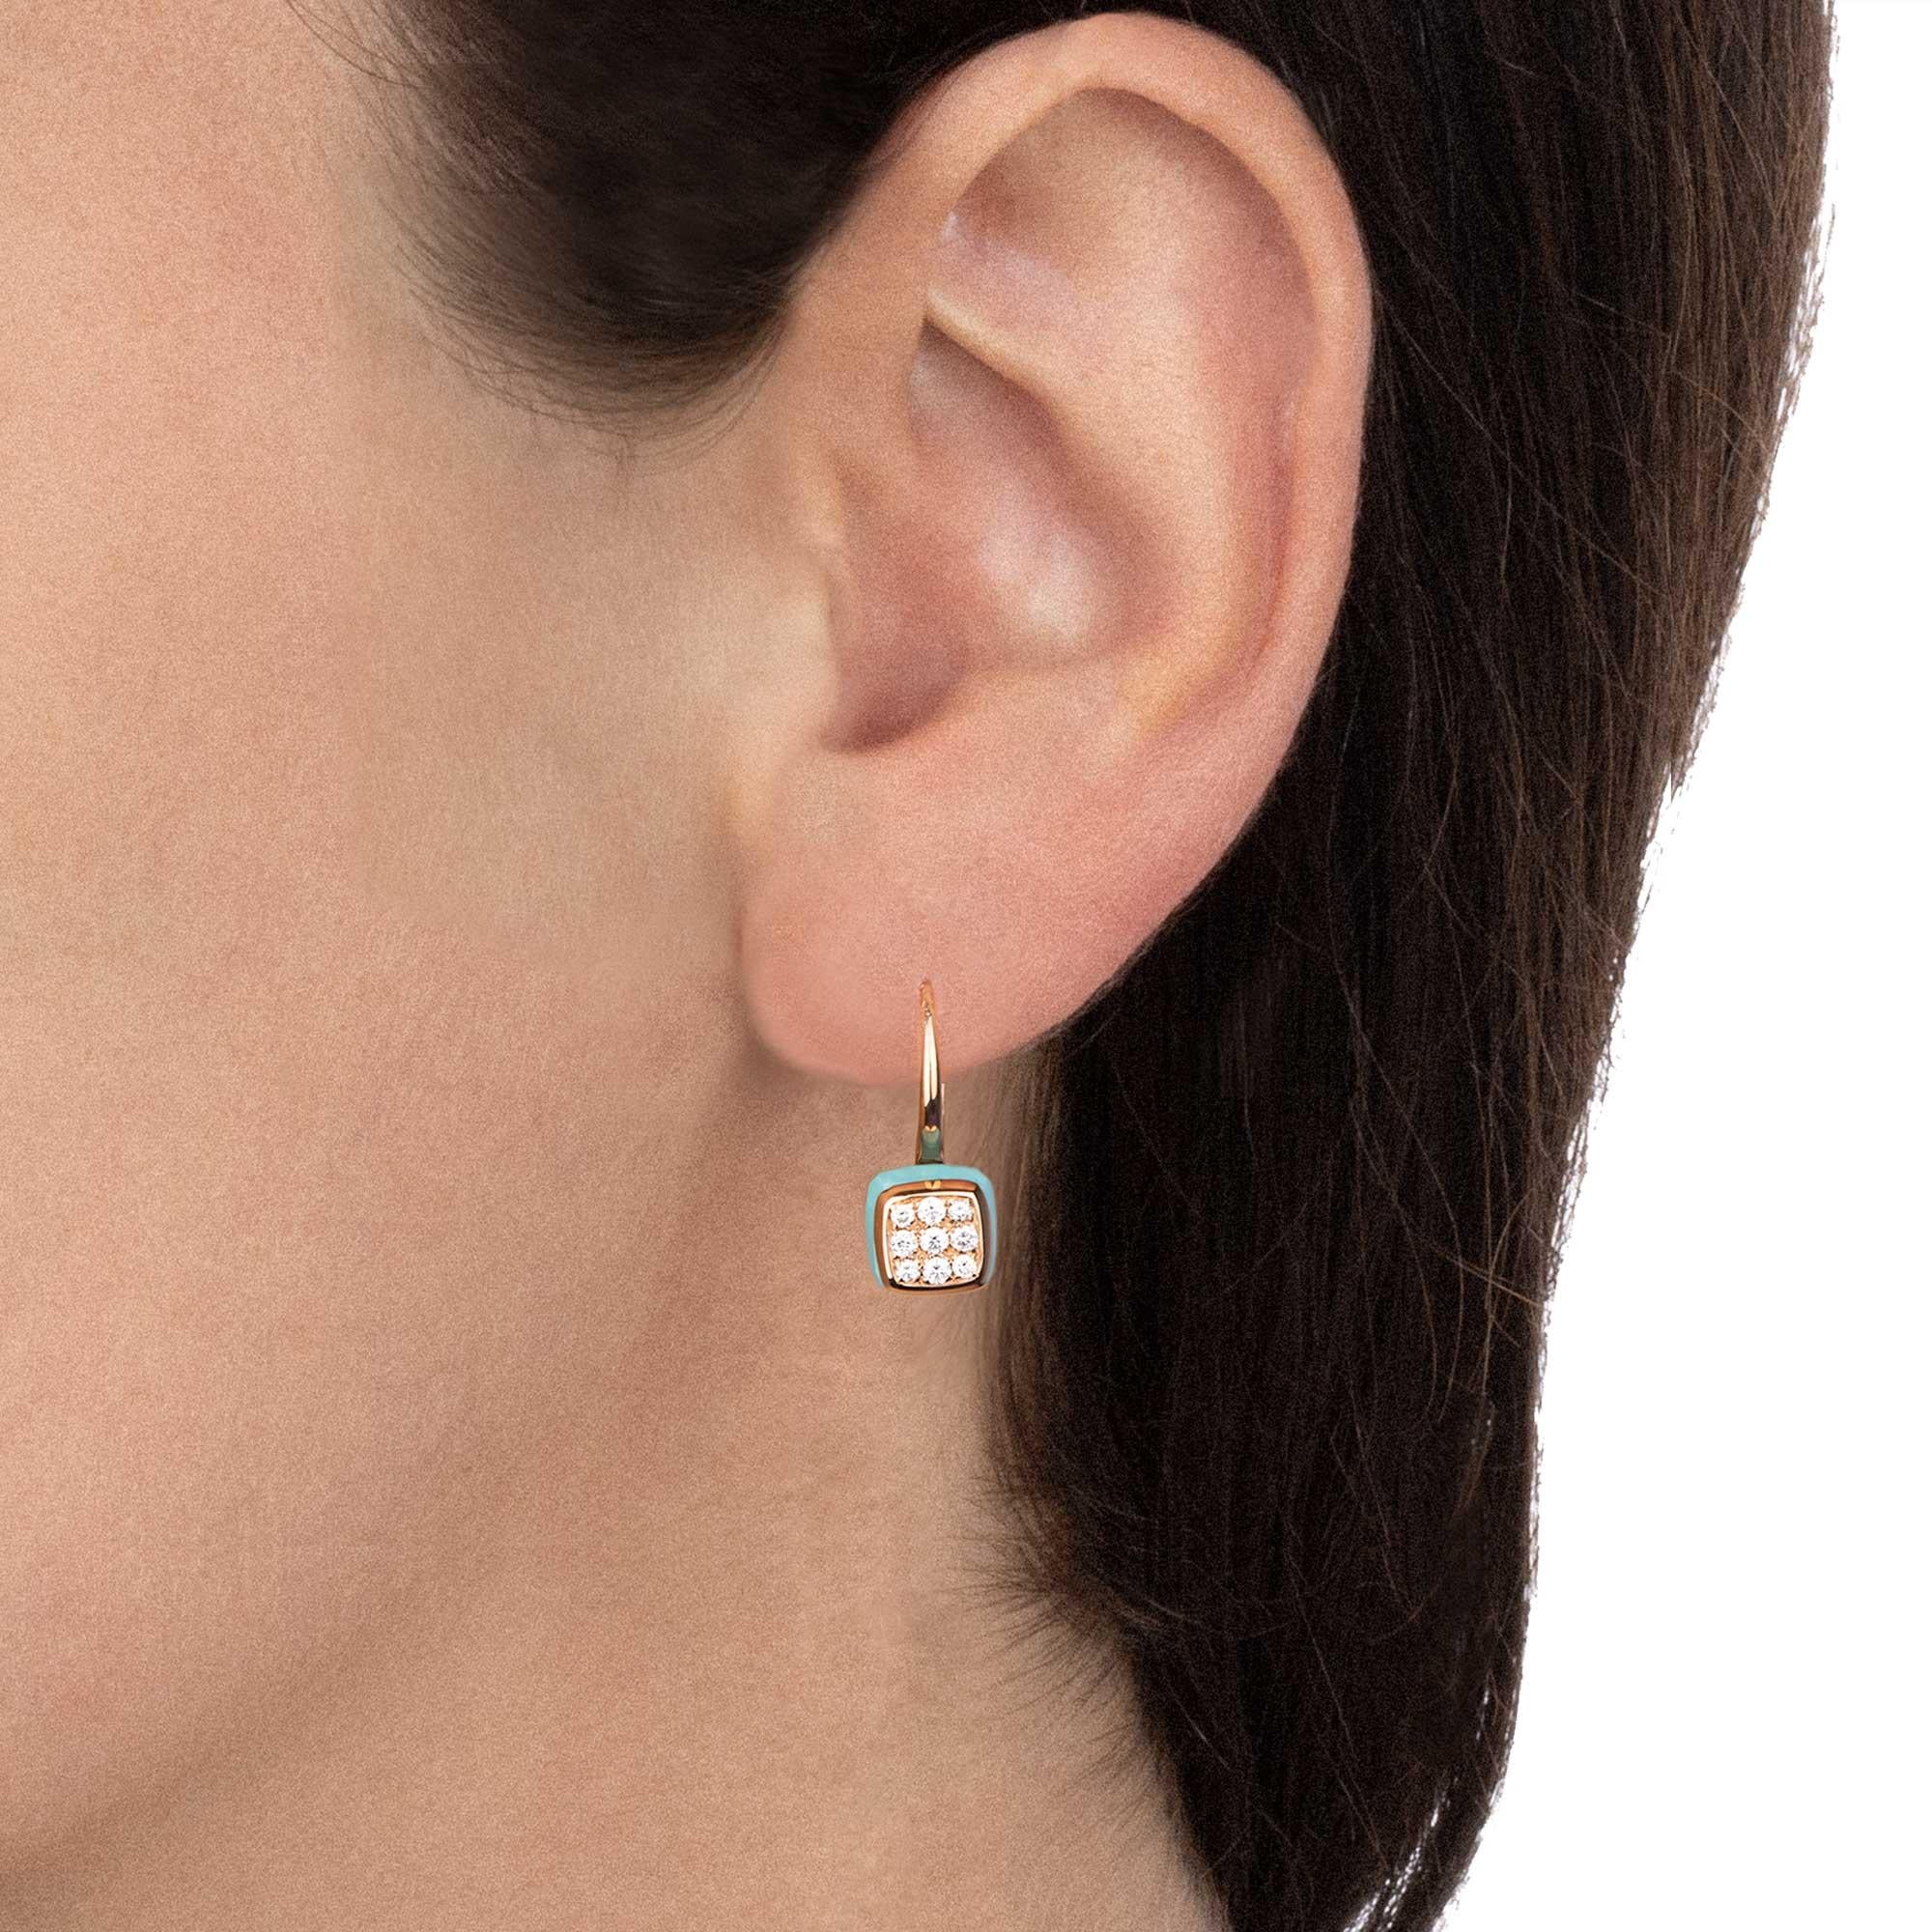 Light blue like a summer sky, the turquoise of these earrings enhances the diamonds like dewdrops on top of it. A refreshing colors harmony for a lively design.

Cast polish rose gold earrings, cushion cut turquoise 5.30 ct and diamonds pavé of 0.40